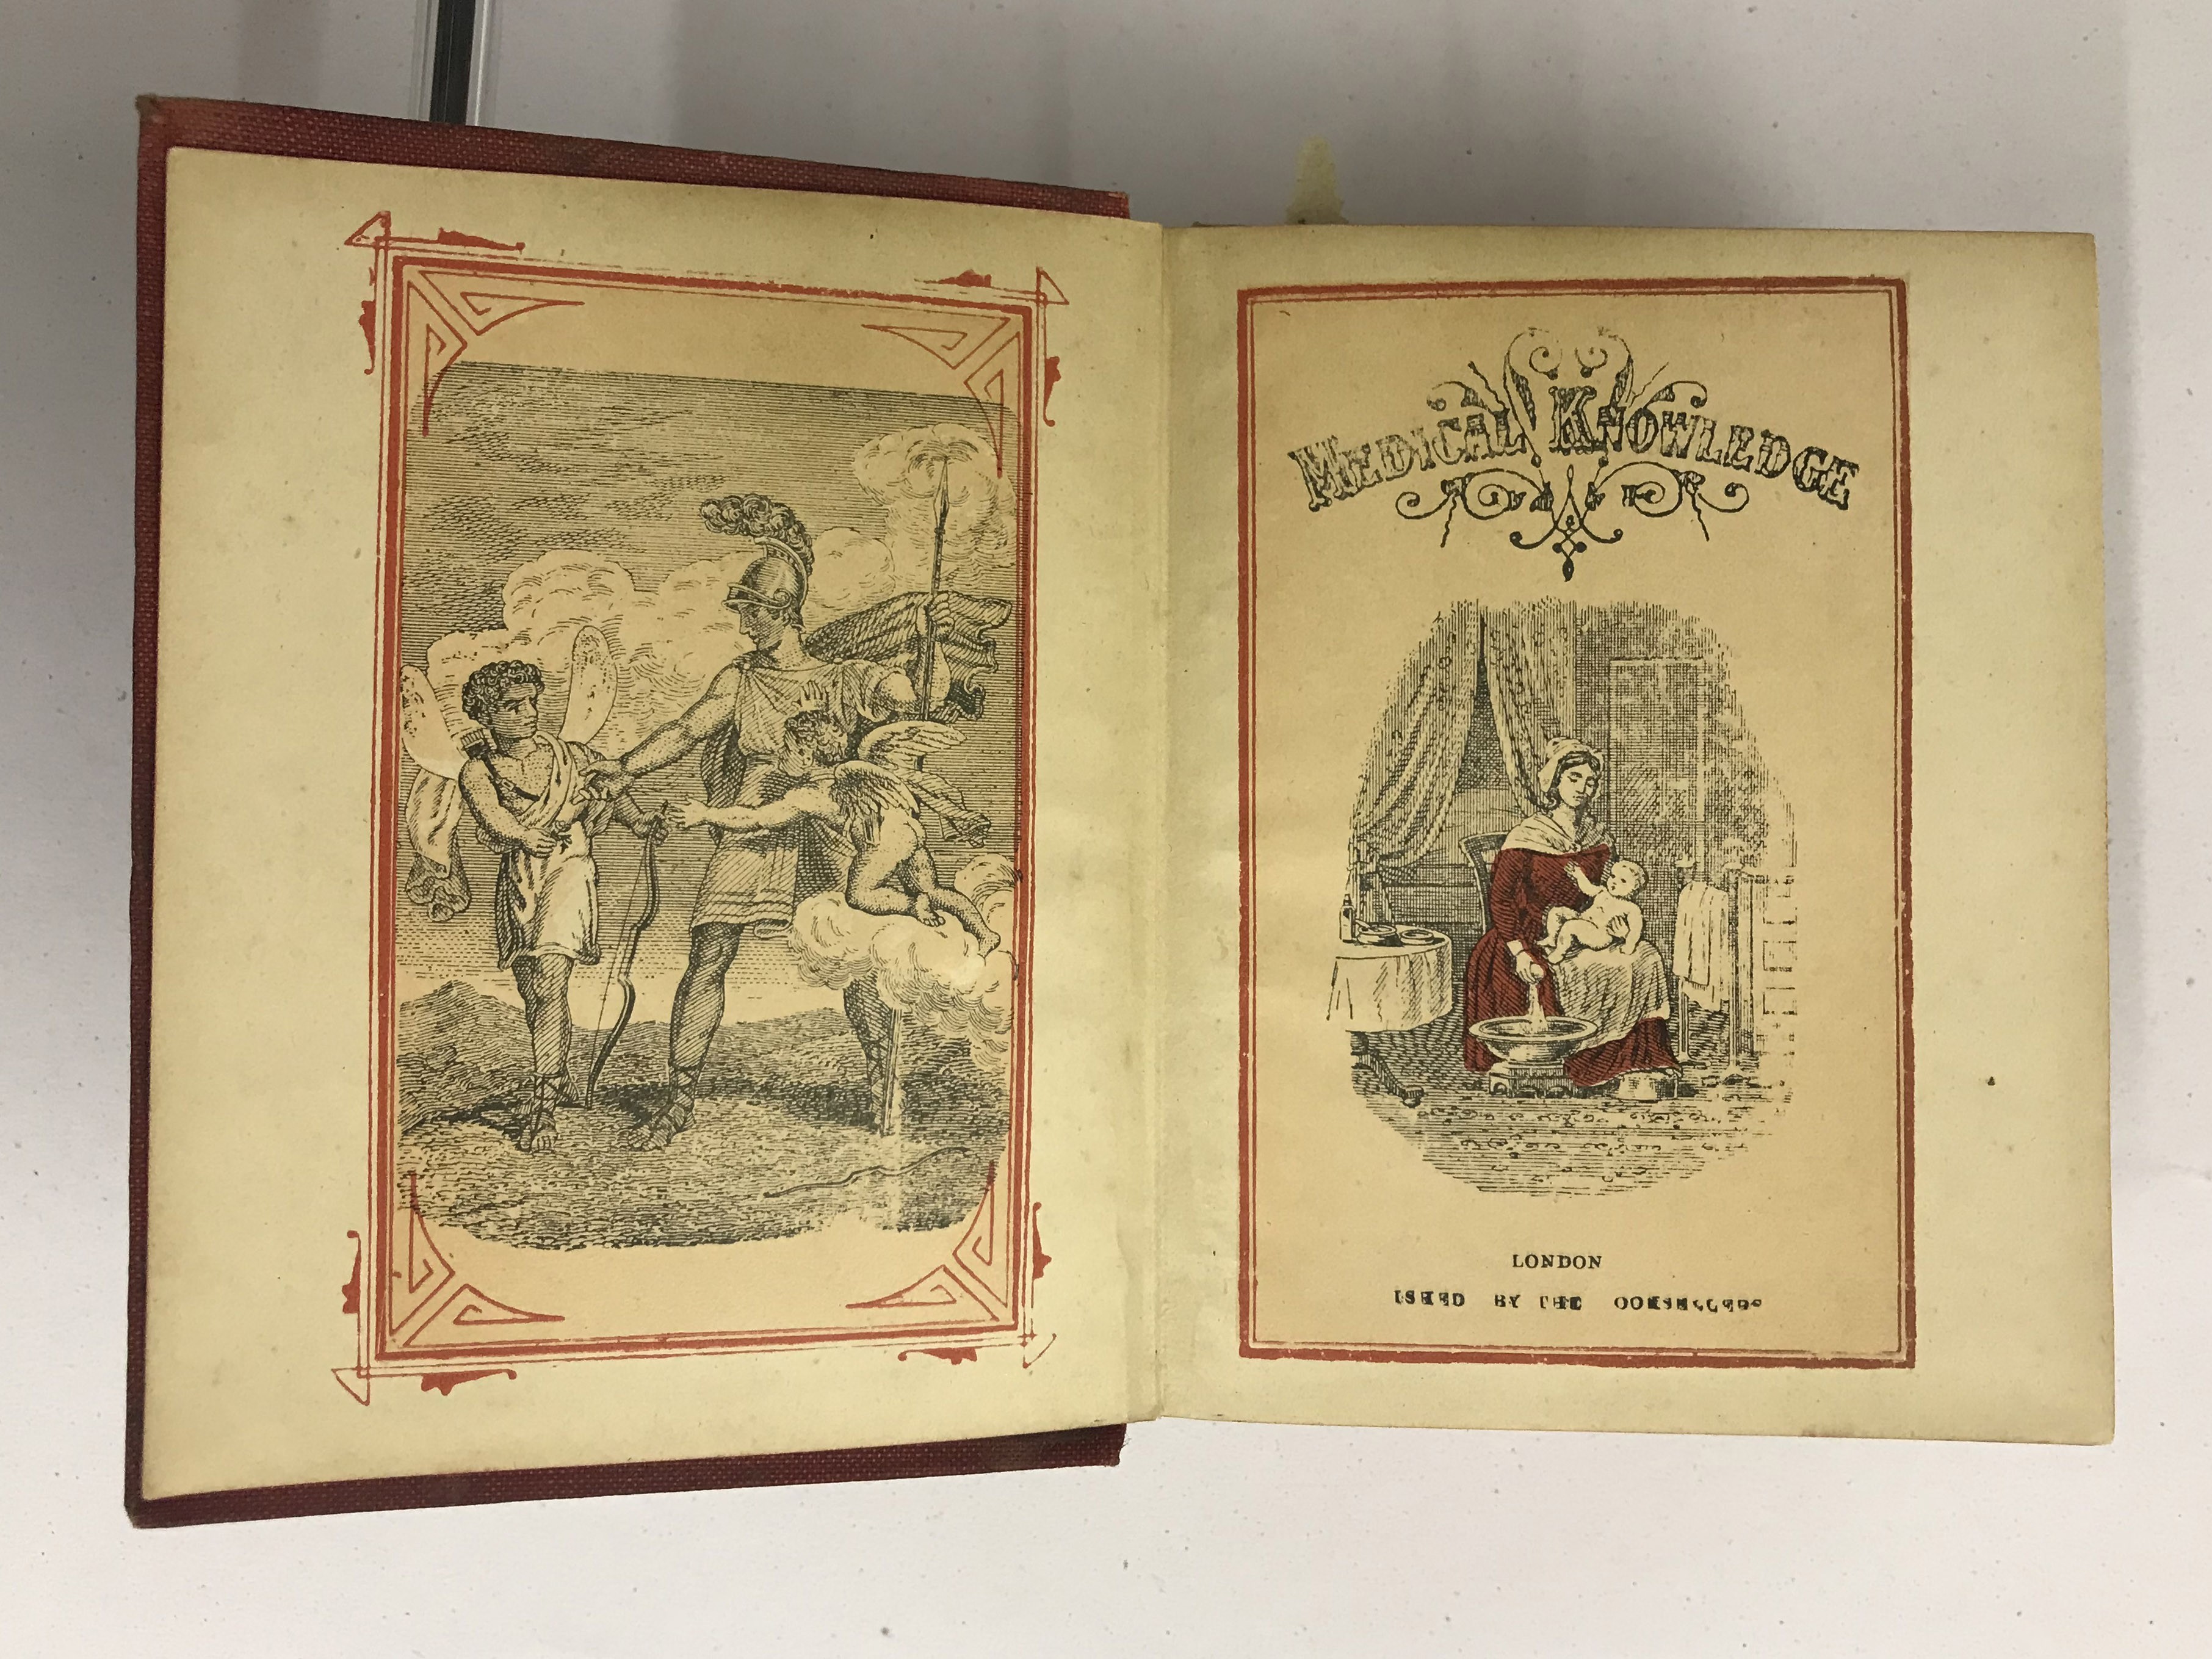 TWO DIFFERENT EDITIONS OF THE WORKS OF ARISTOTLE, FAMILY PHYSICIAN - Image 3 of 13